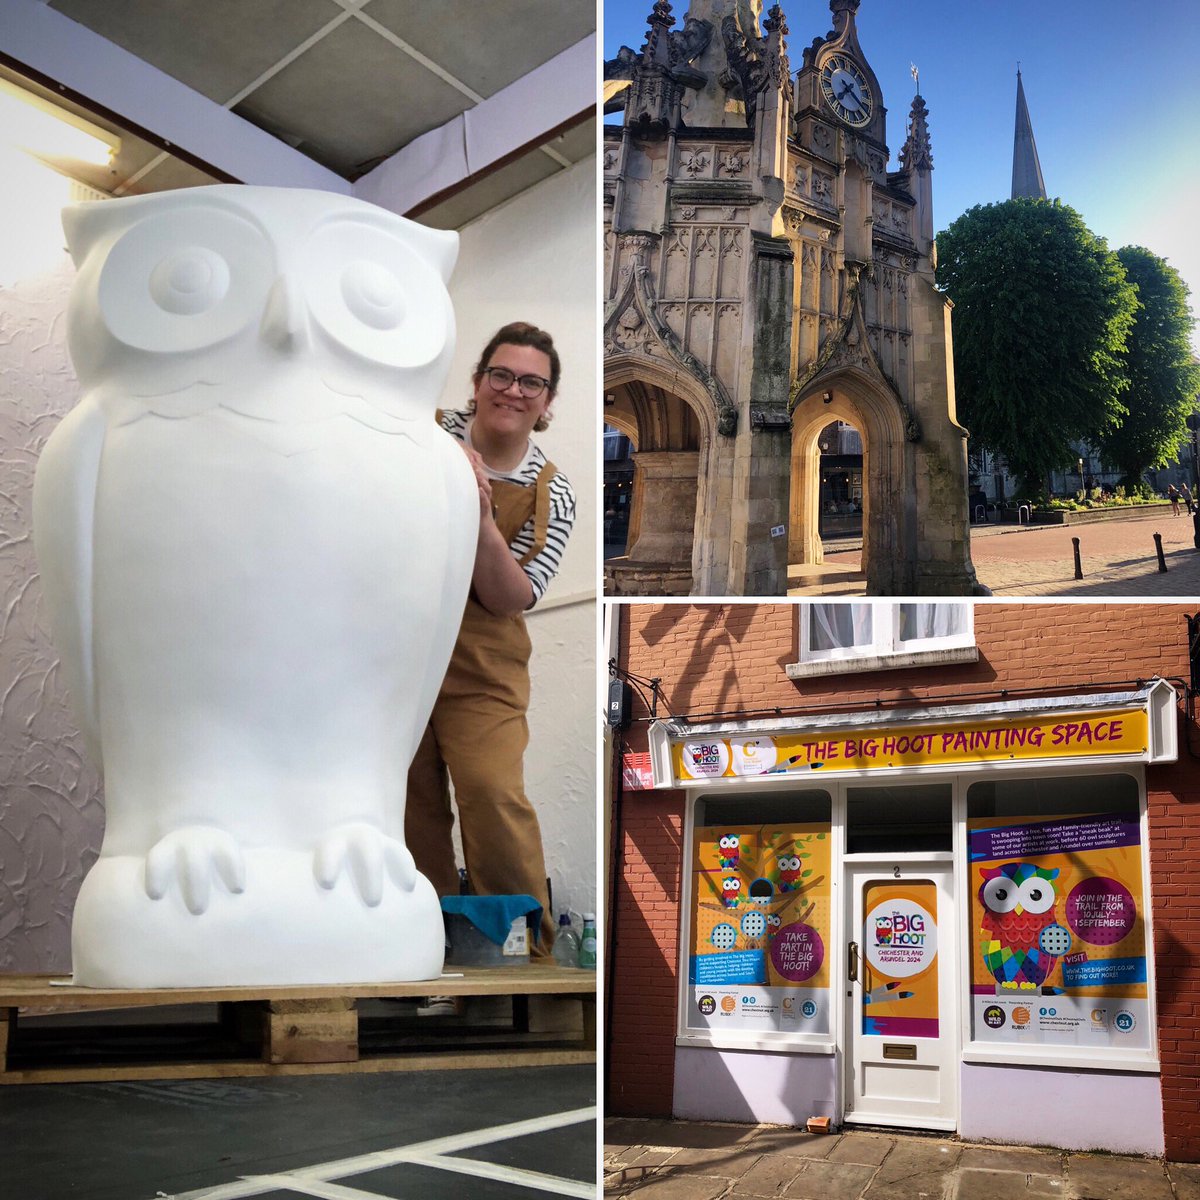 Hoo do we have here?! 🦉 Day 1 painting for @ChestnutOwls in Chichester. Lovely space, lovely sculpture and lovely city…what’s not to like? @wildinart